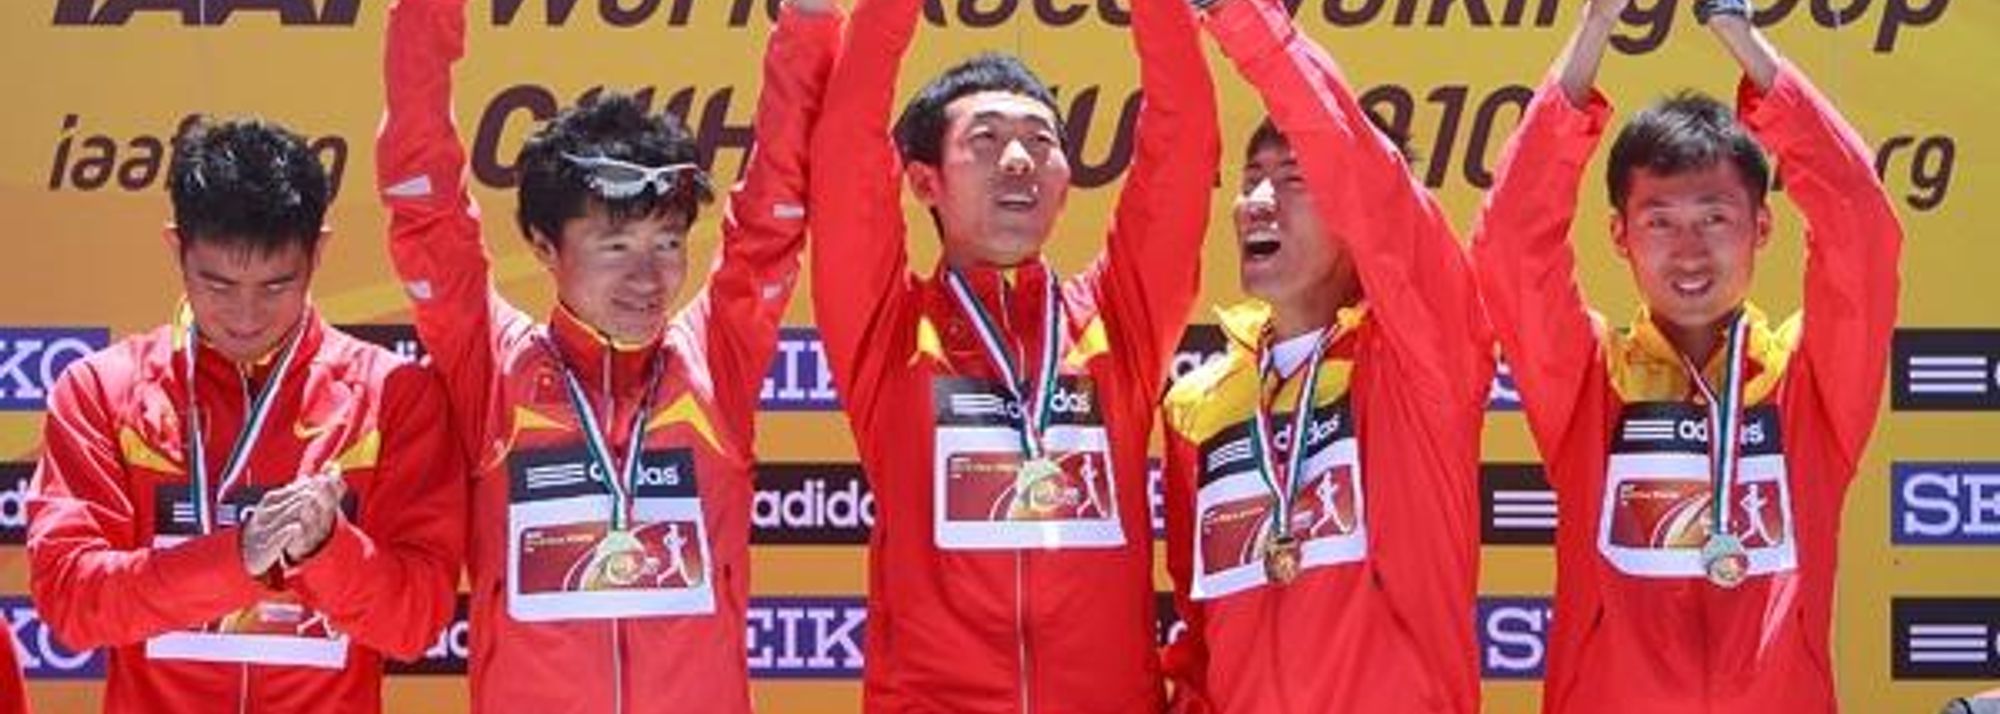 The men’s 20km winner was delighted ‘luck’ had finally turned in China’s favour after a break of 15 years since the country’s last individual men’s title.